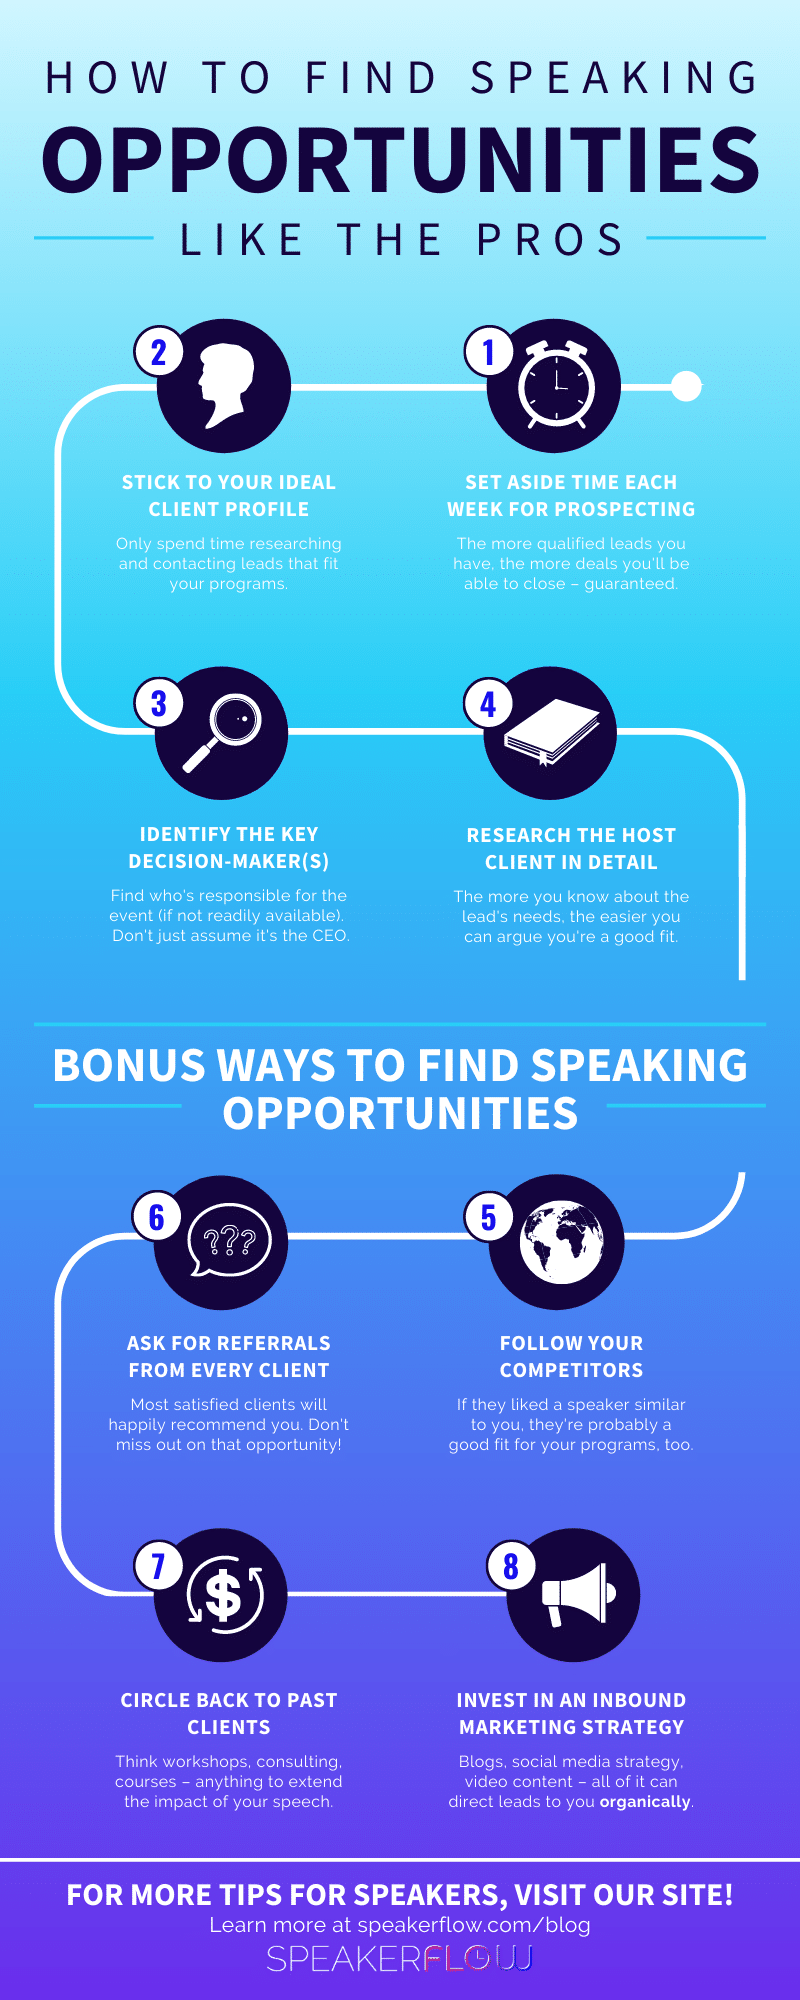 How To Find Speaking Opportunities Like The Pros